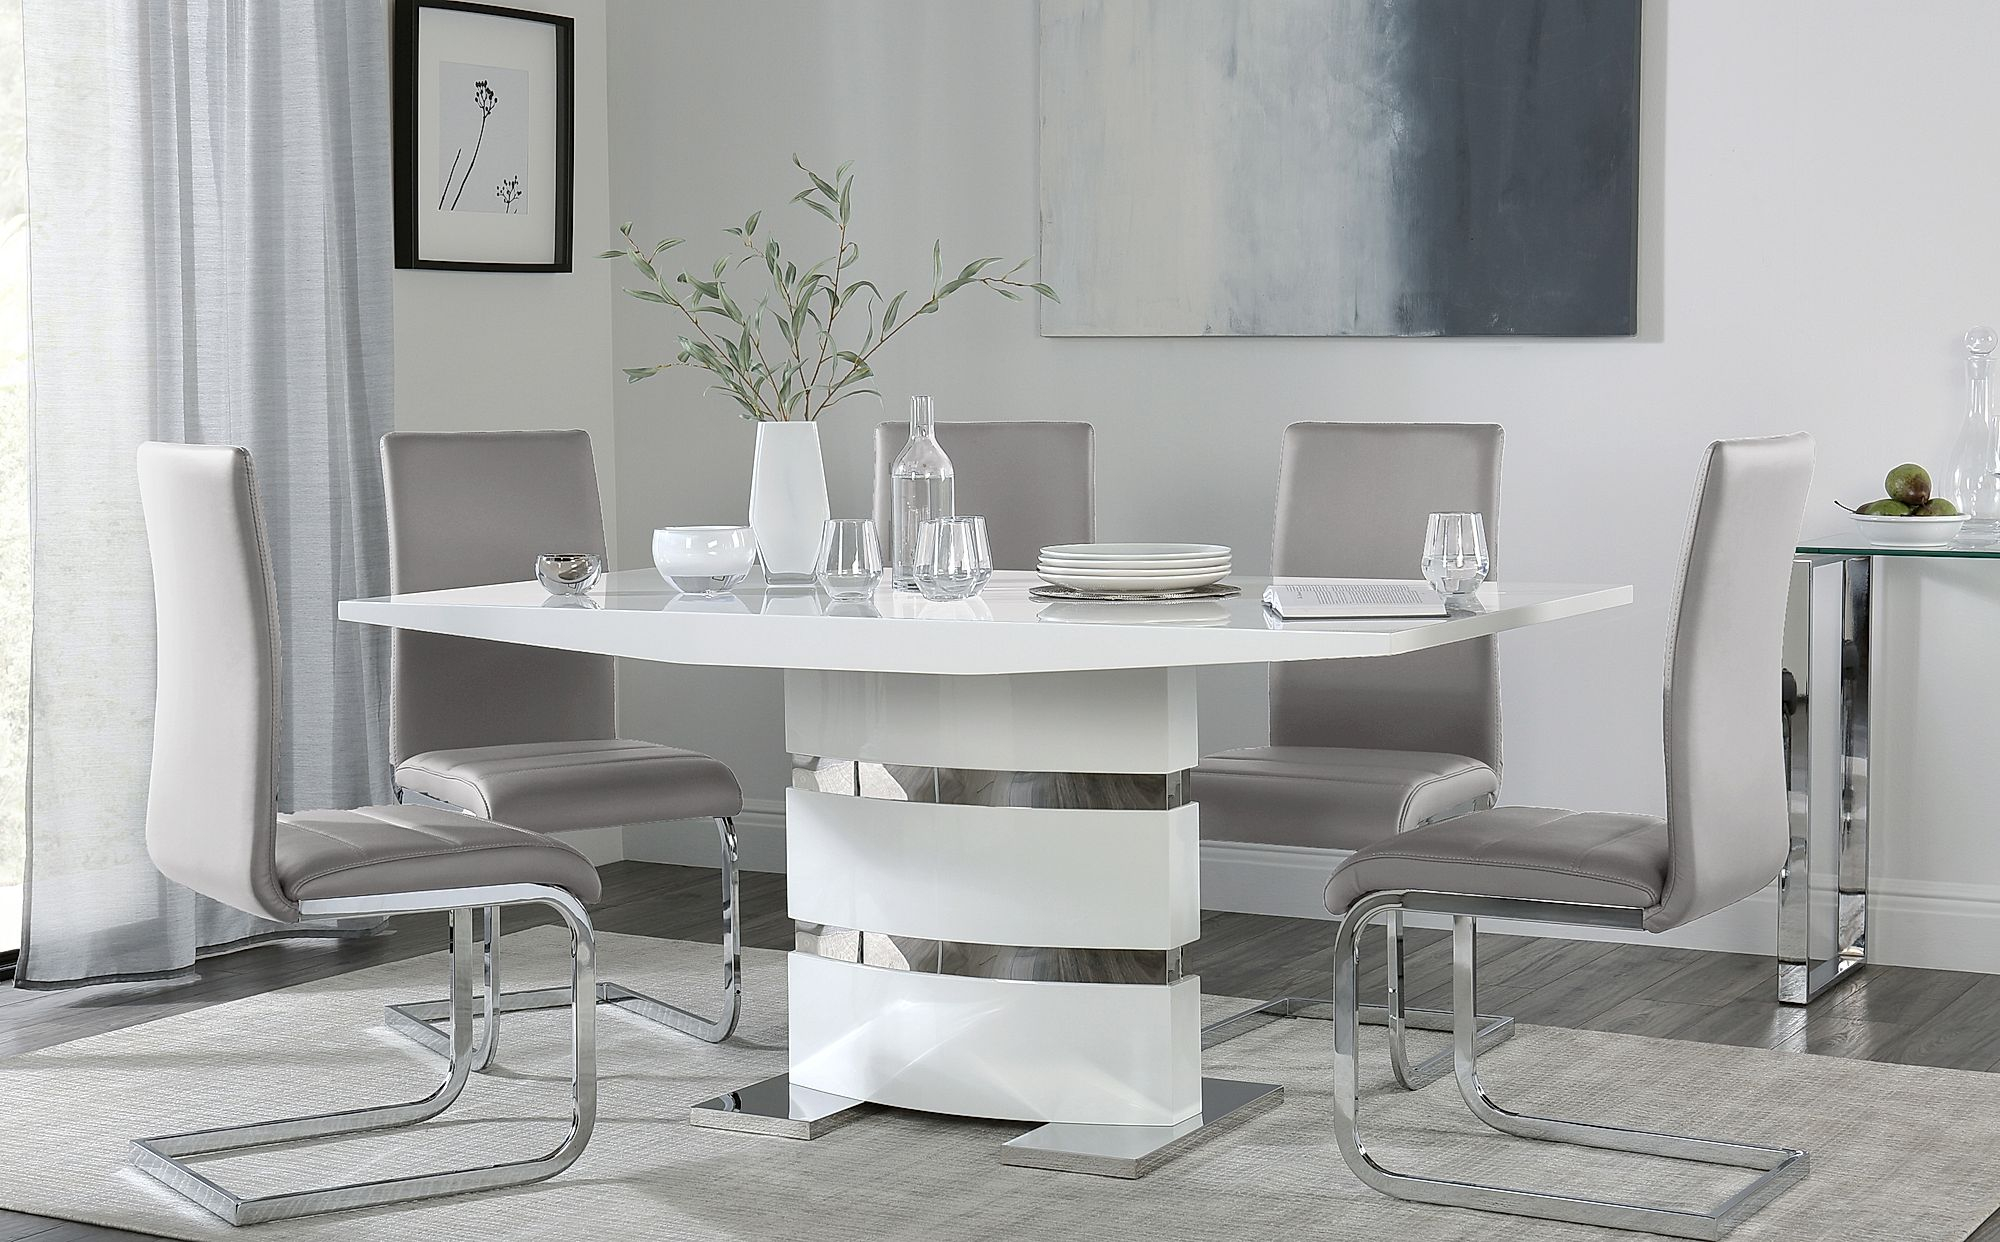 Komoro White High Gloss Dining Table With 6 Perth Light Grey Leather Chairs intended for sizing 2000 X 1242